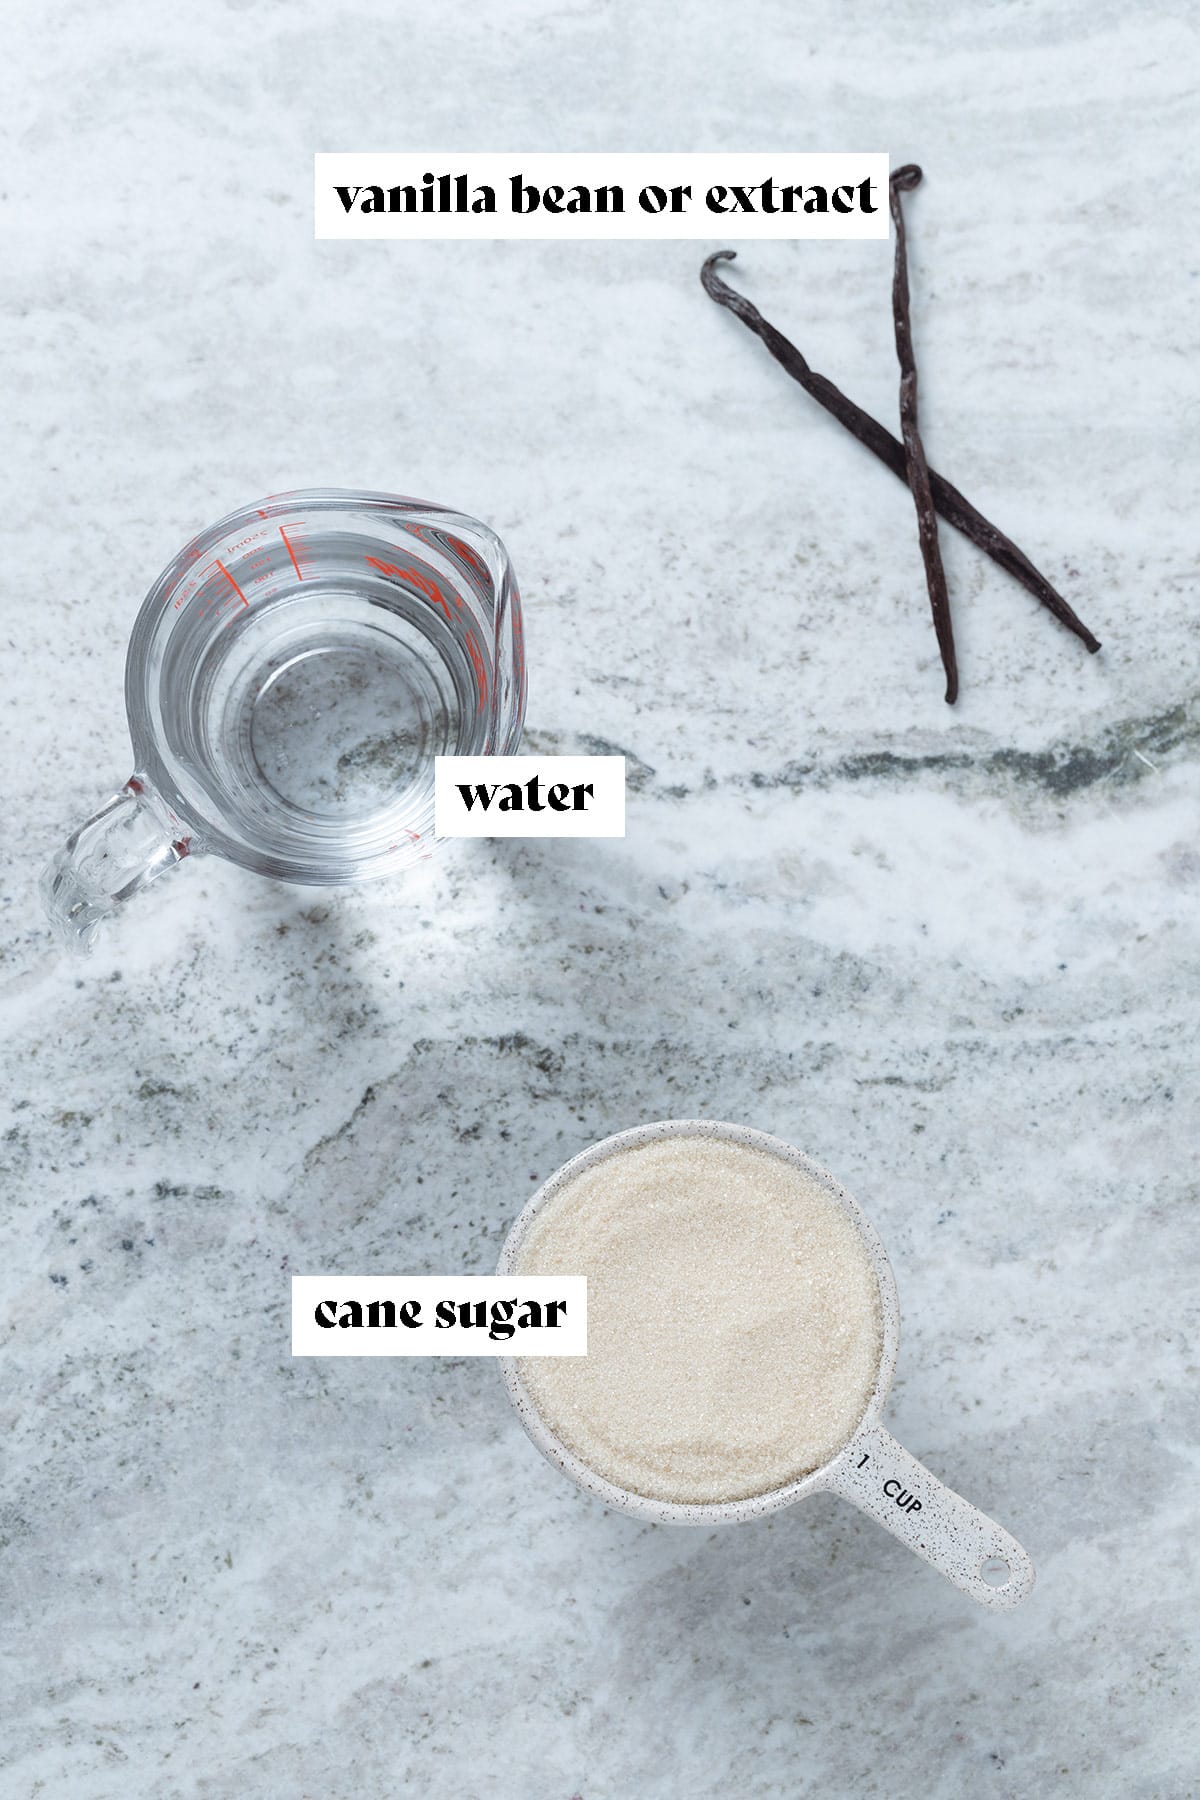 Cane sugar, water, and a whole vanilla bean on a grey stone background with text overlay.